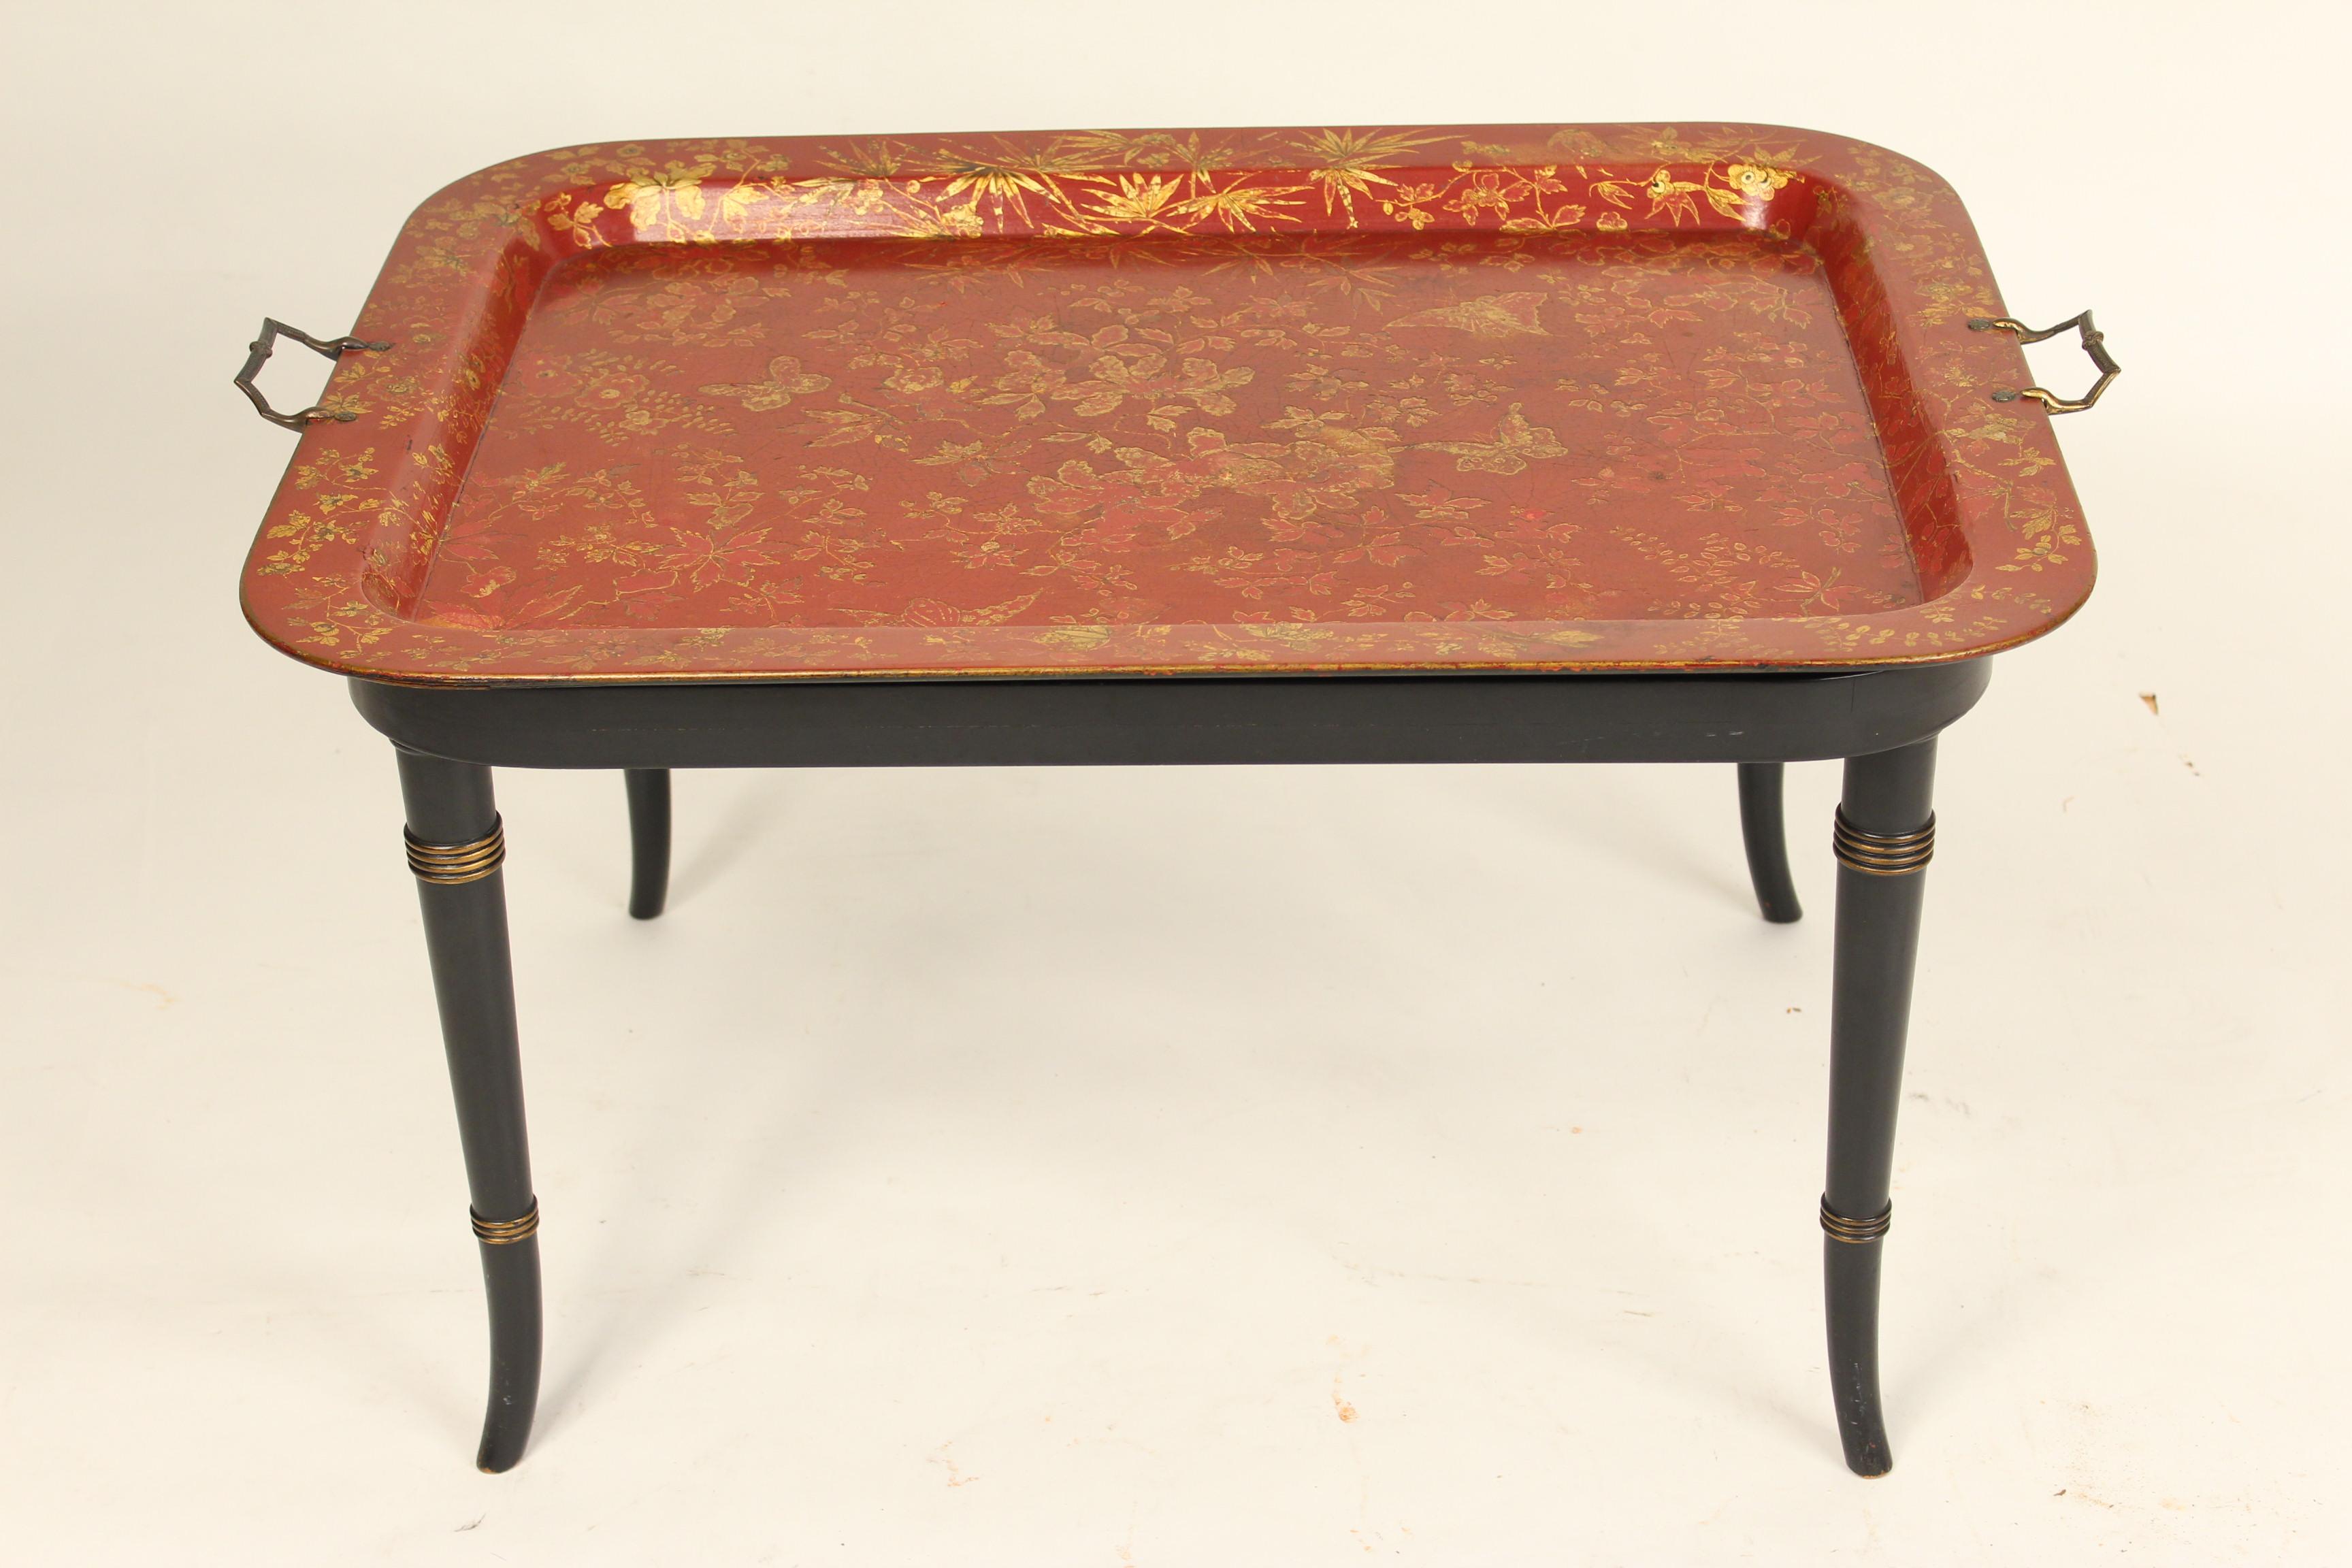 English Regency style red papier mâché and gilt decorated tray with brass handles, late 19th century, resting on a 20th century stand. The bottom of the papier mâché tray is marked 